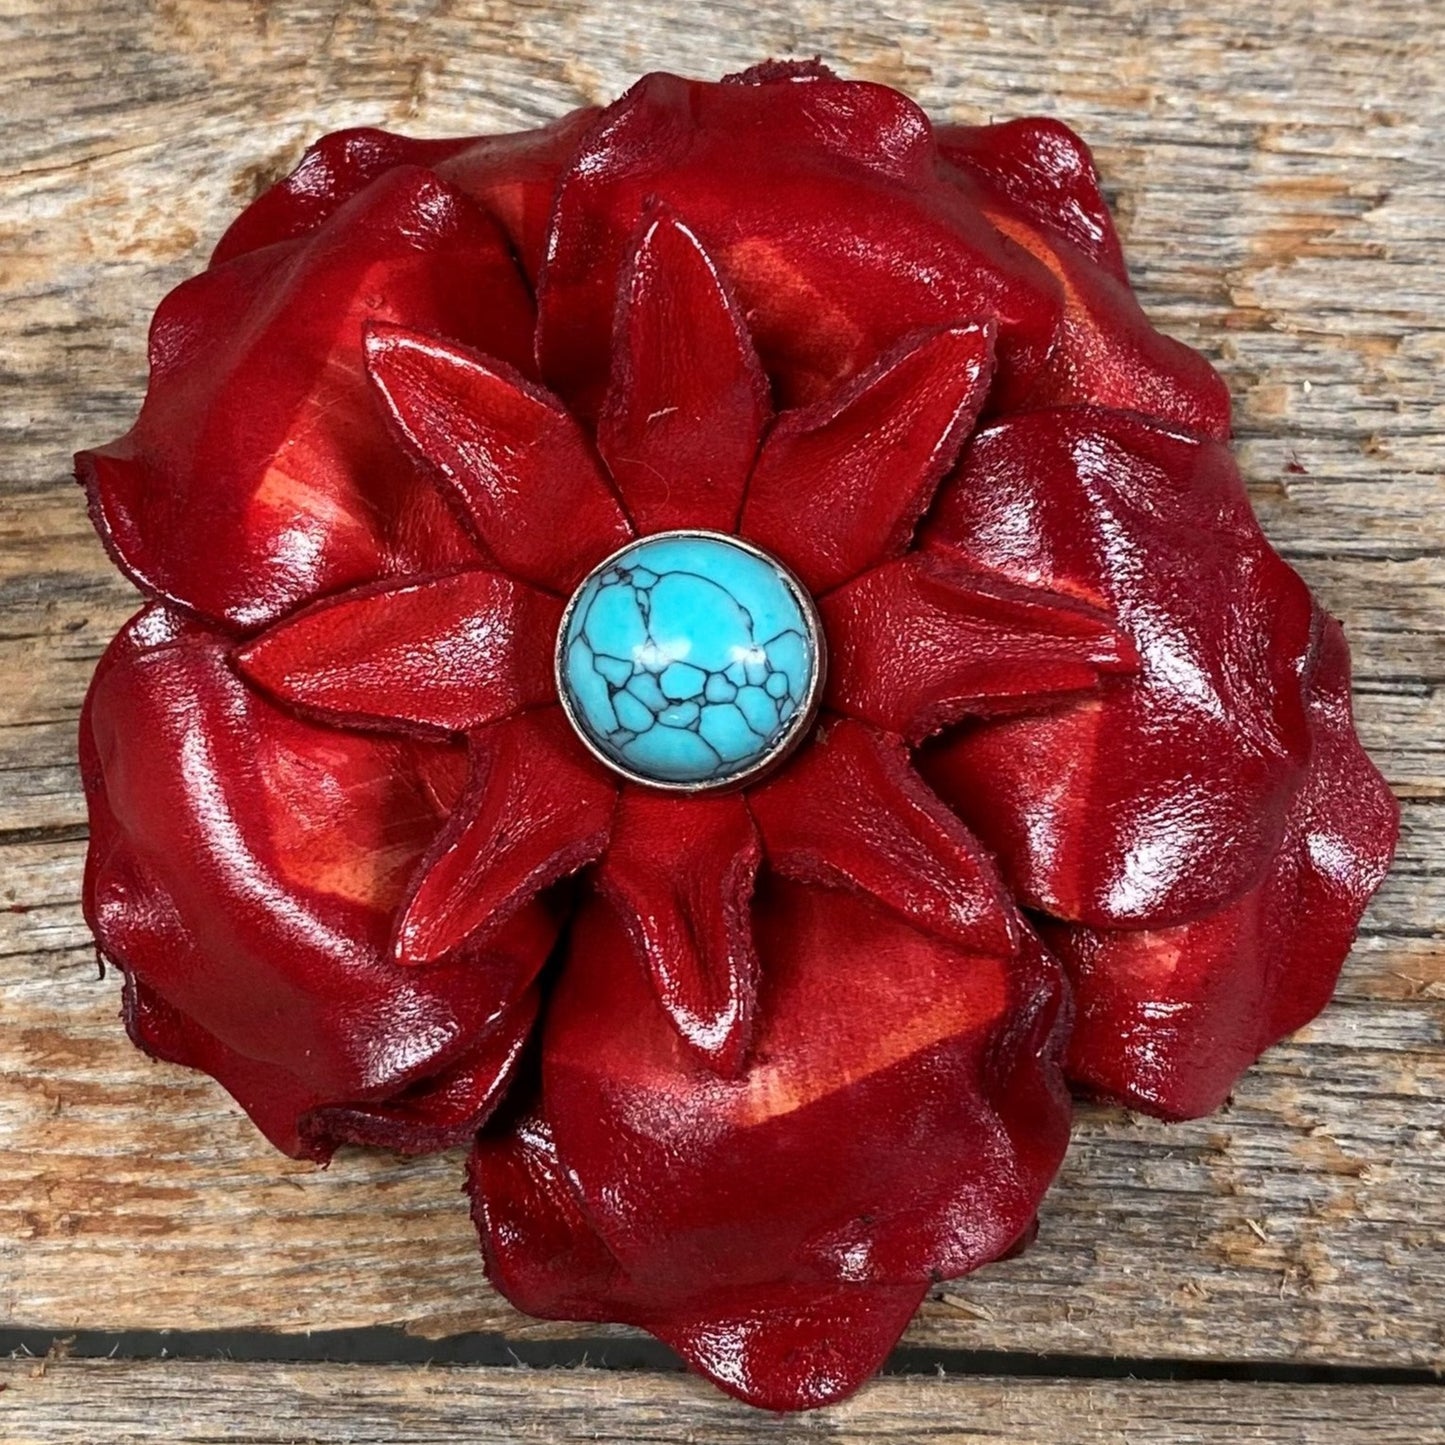 Red Gardenia Flower With Round Turquoise Cabochon